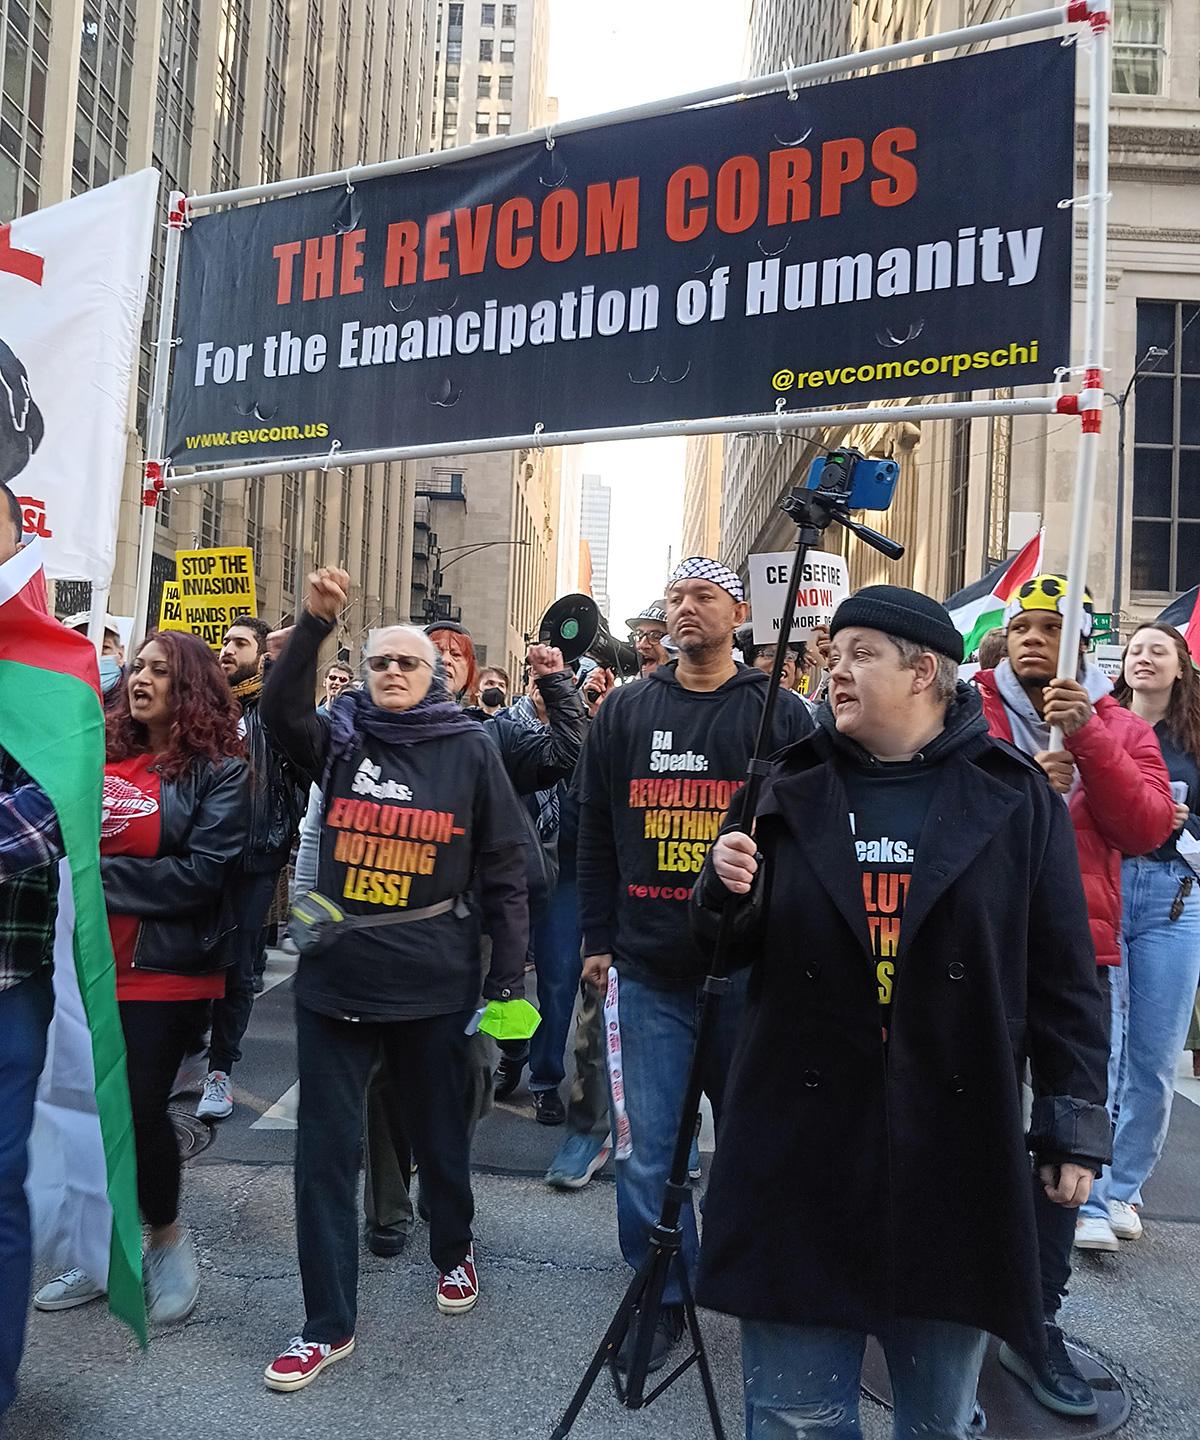 In Chicago, March 2, a contingent of revcoms marched defiantly under the banner “ The Revcom Corps for the Emancipation of Humanity.” 